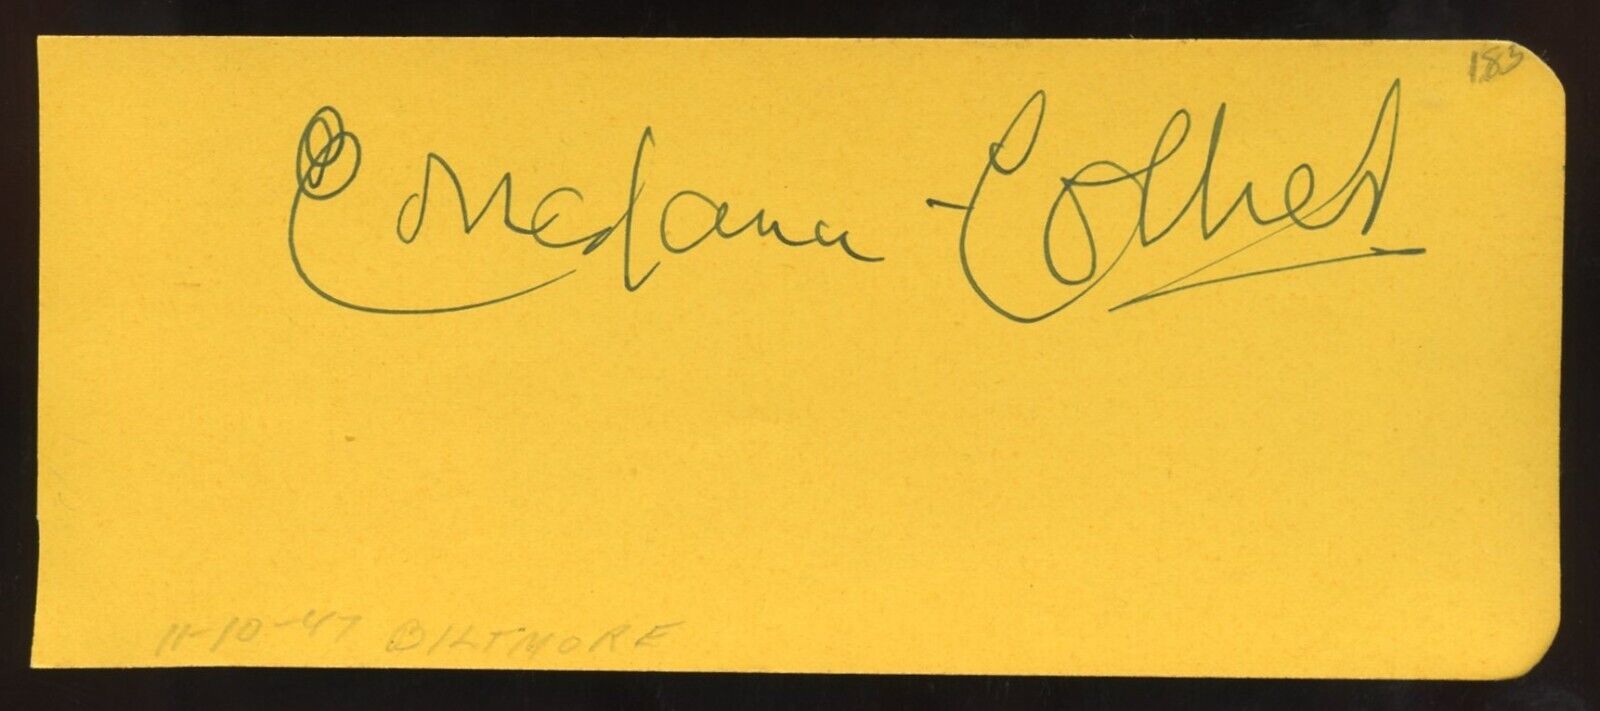 Constance Collier d1955 signed 2x5 autograph on 11-10-47 at Biltmore Theater LA